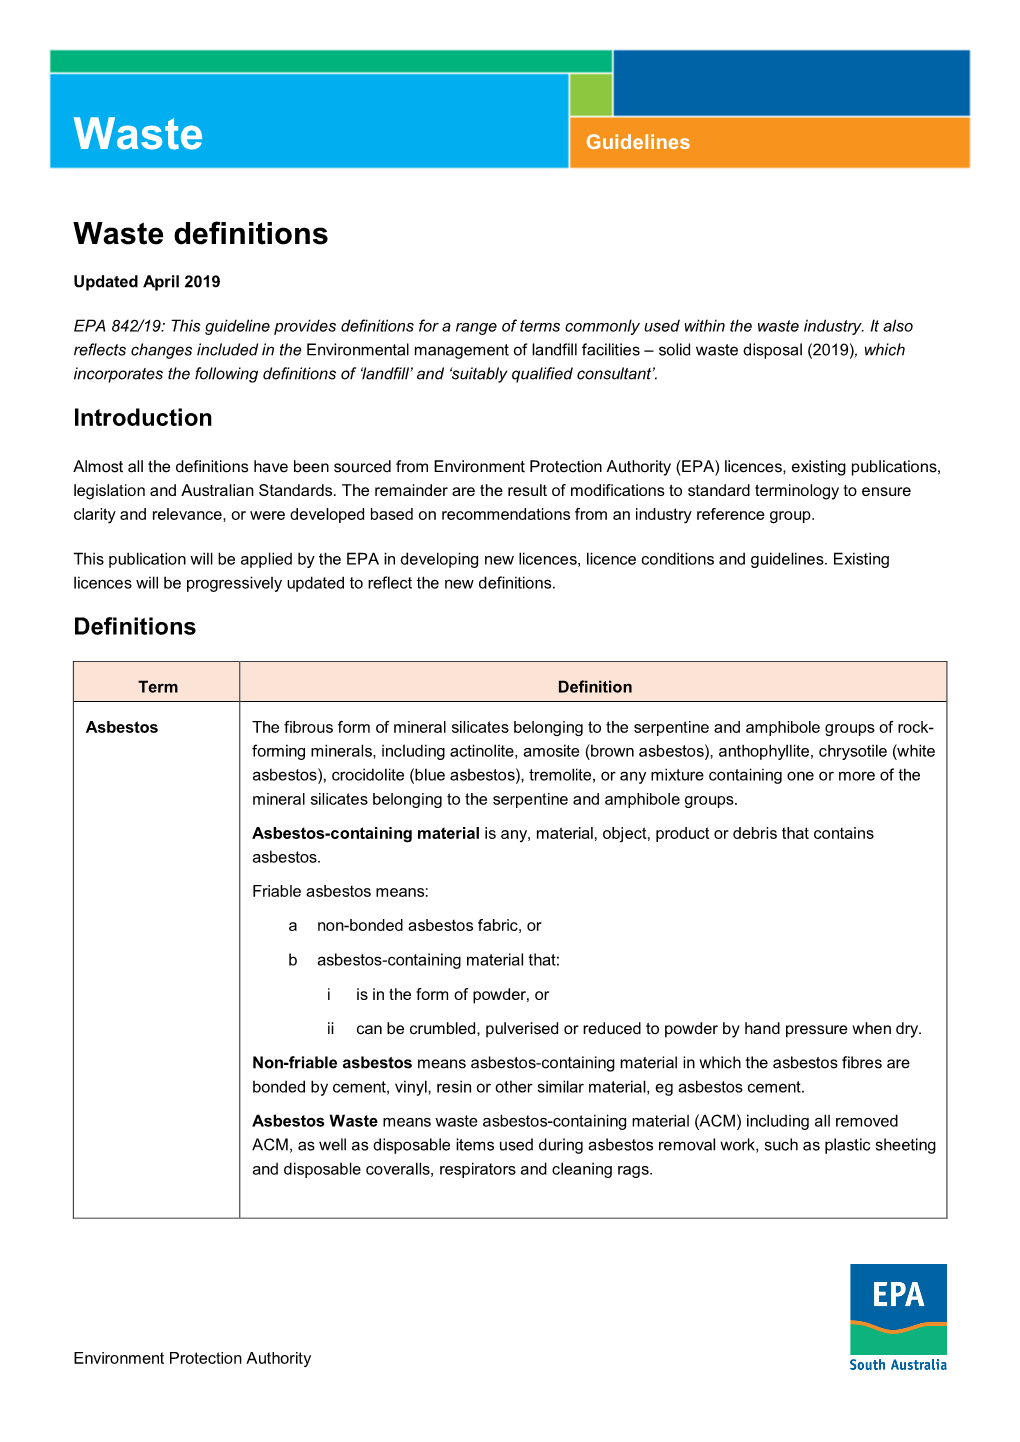 Waste Definitions